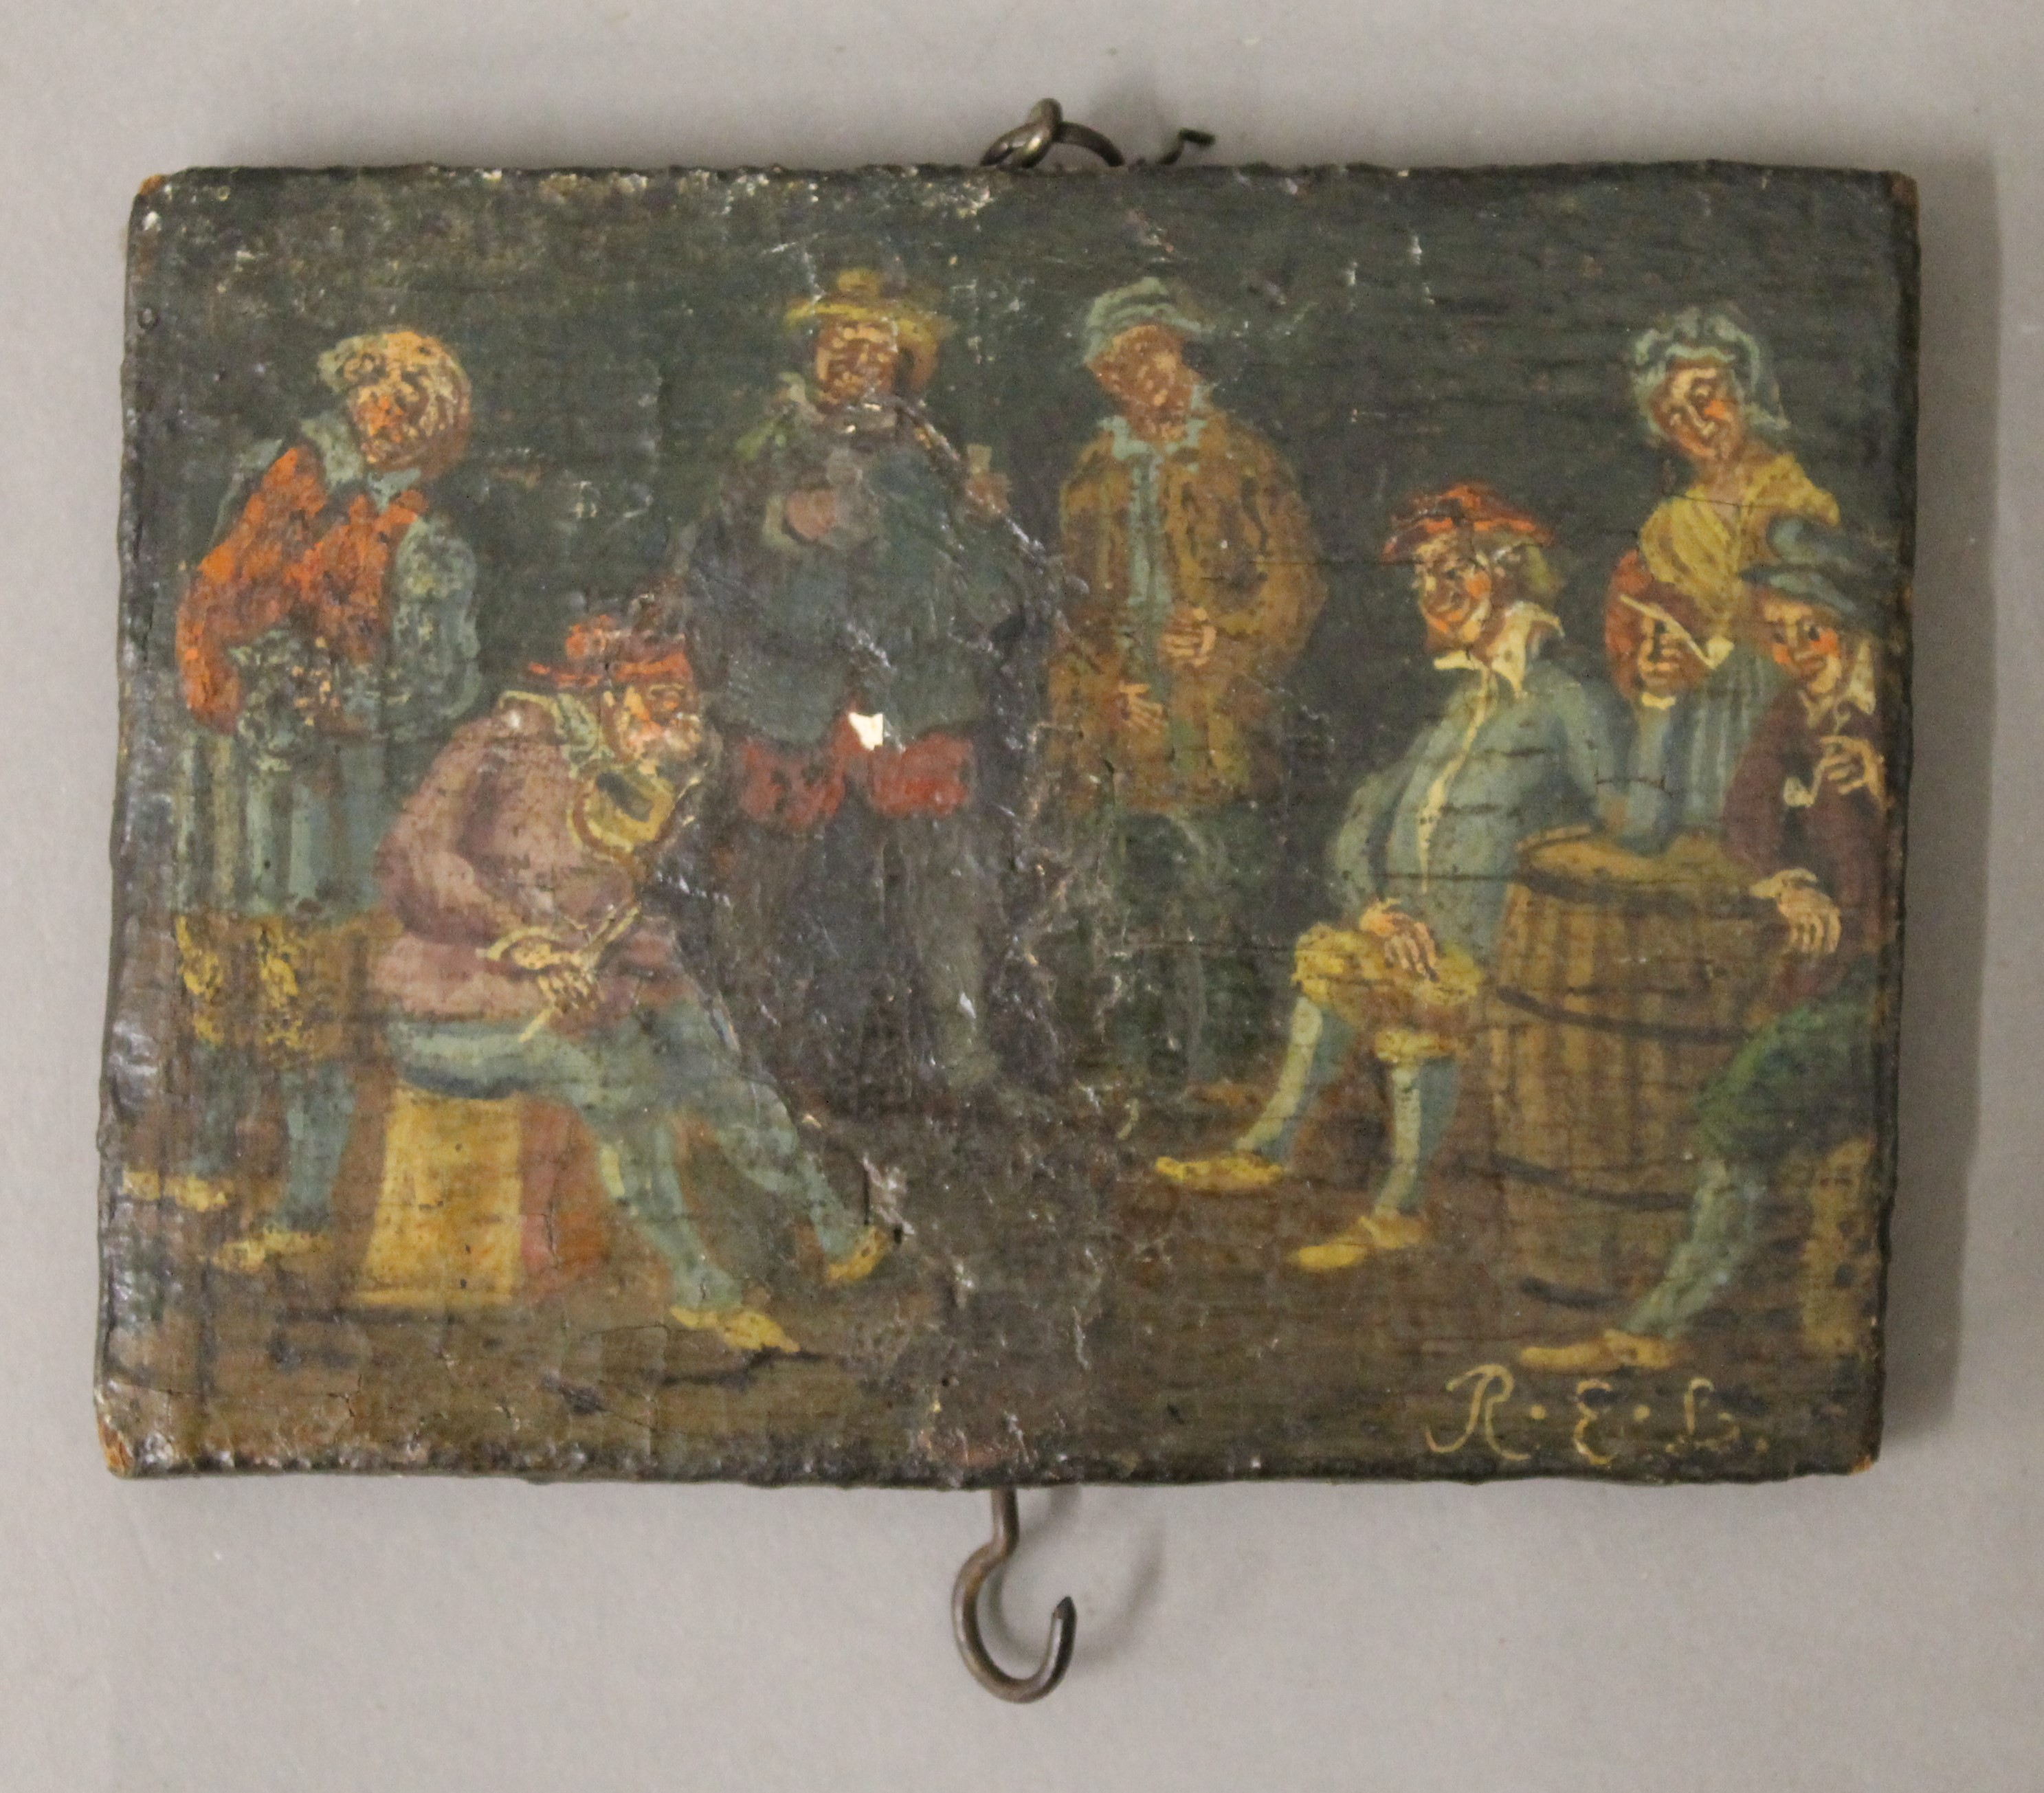 A collection of 18th/19th century miniature paintings on panel, initialled R.E.L. - Image 2 of 10